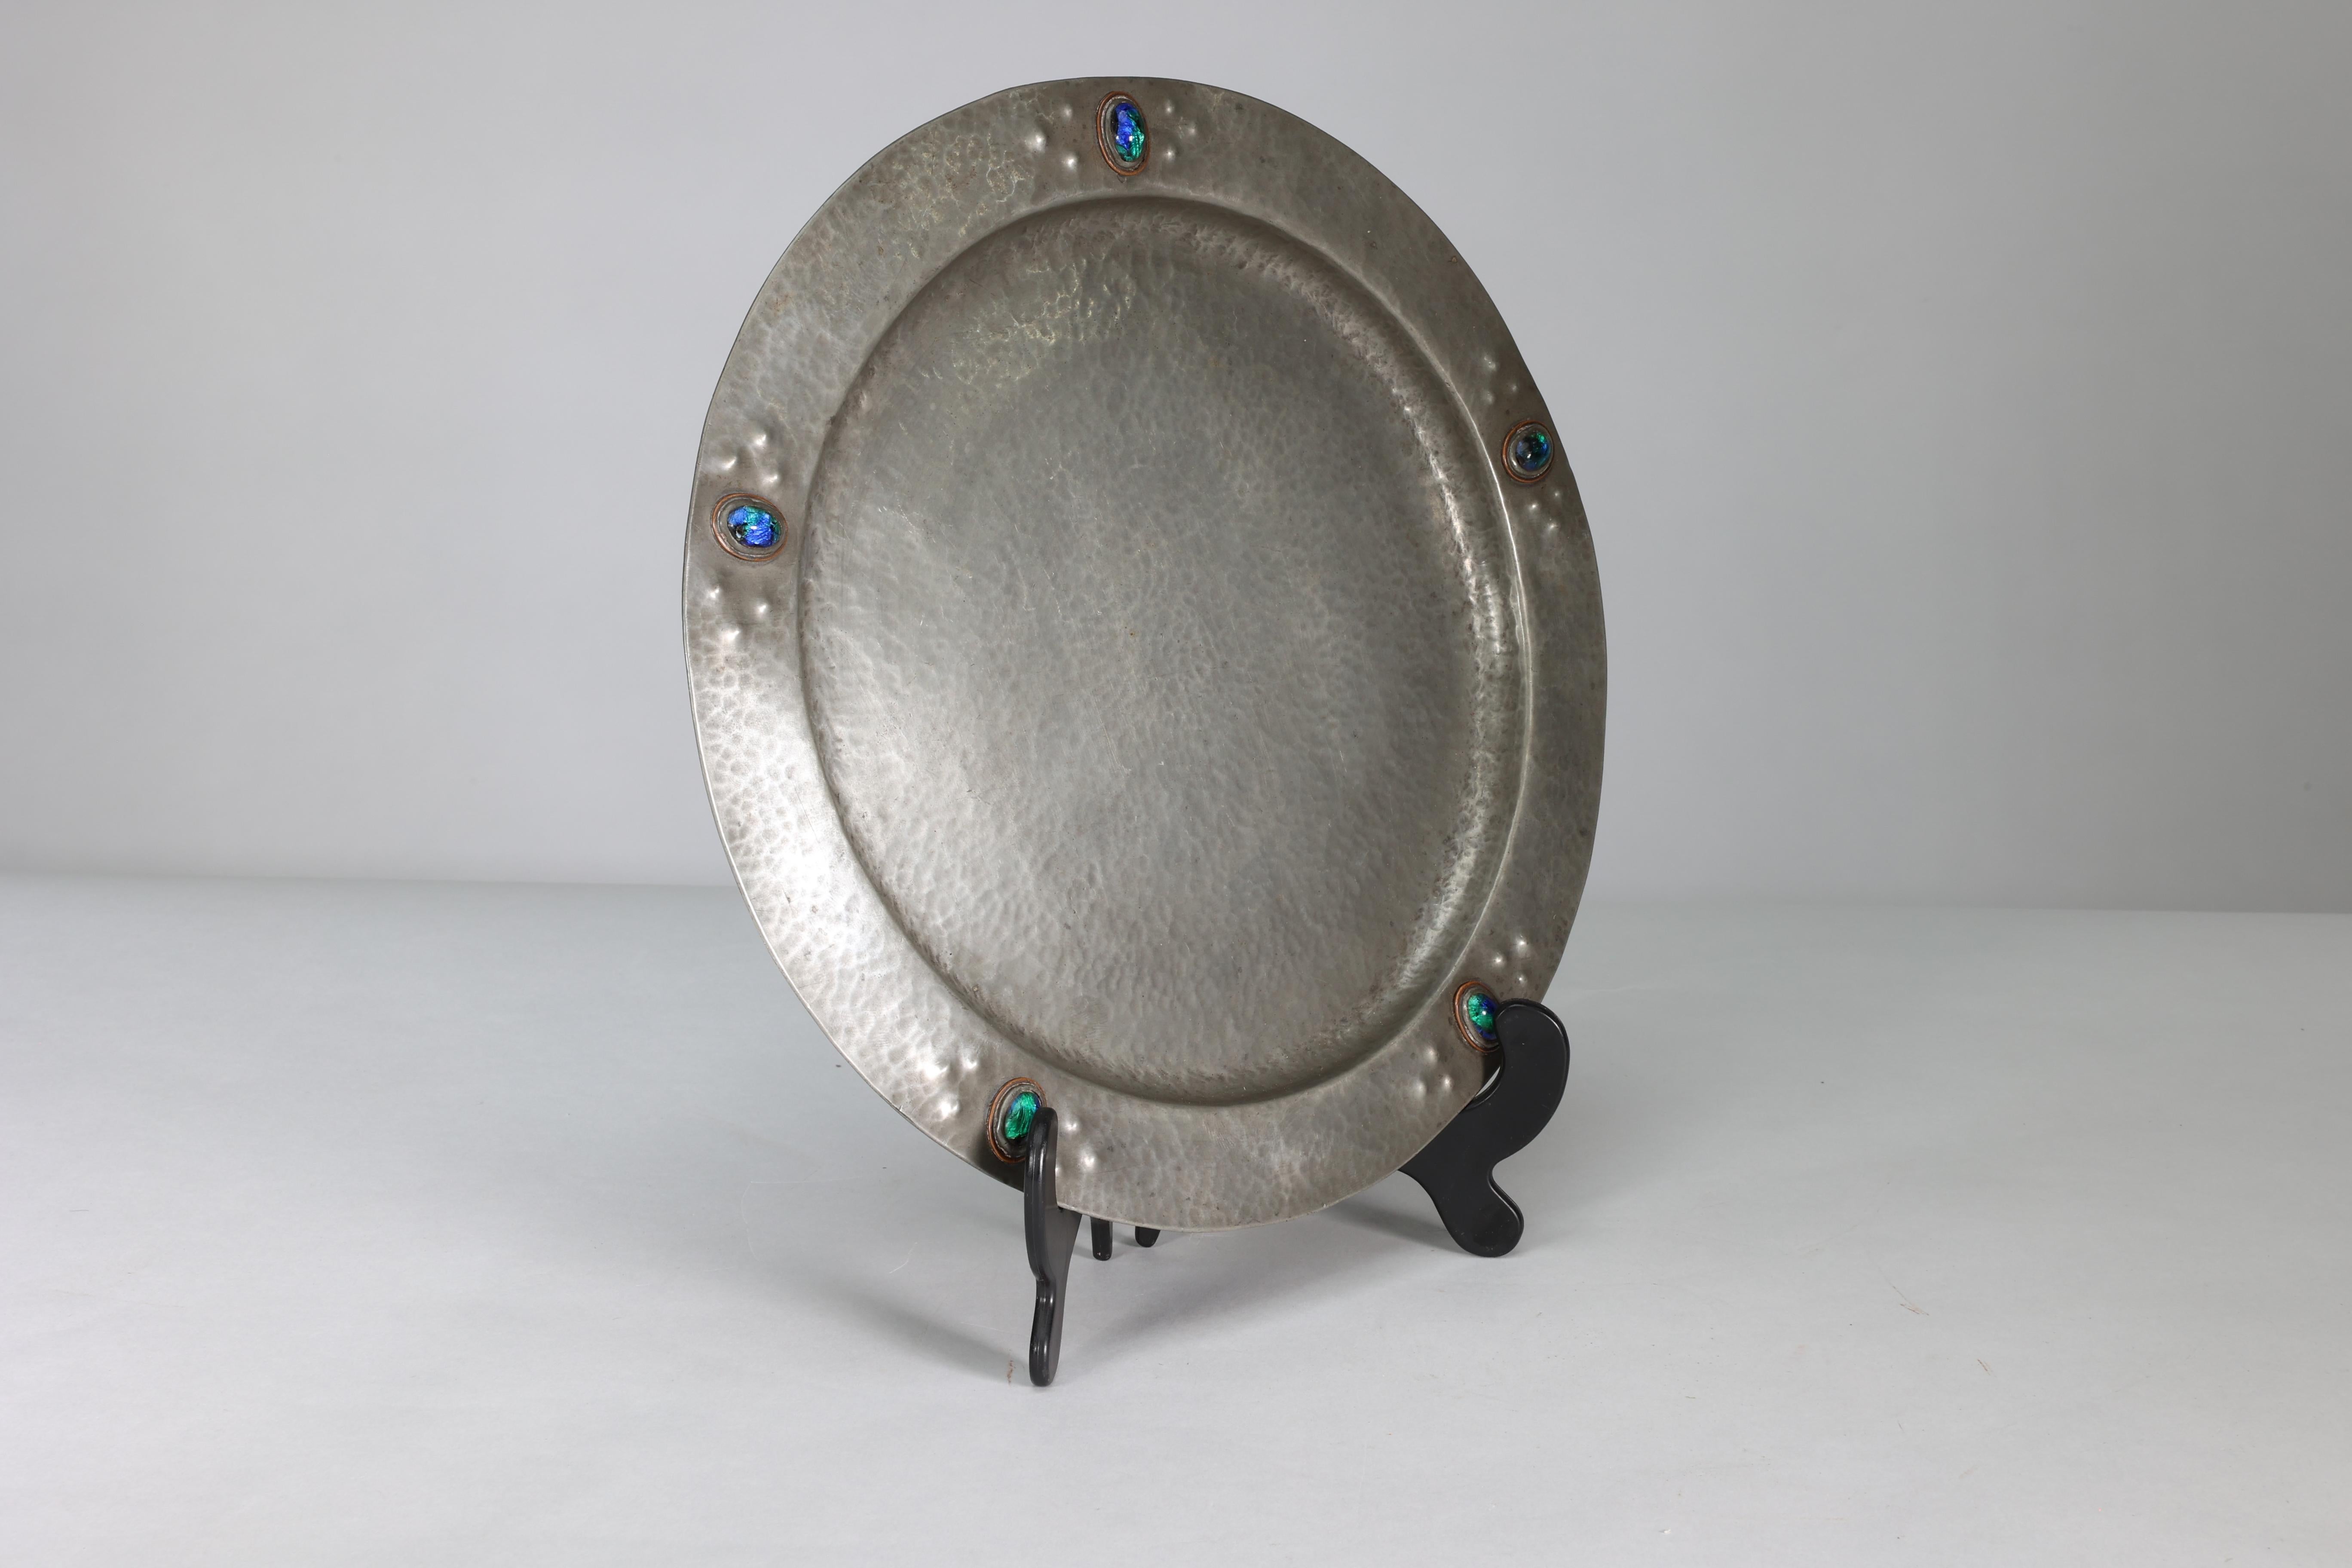 Liberty & Co attributed. An Arts & Crafts hand hammered pewter plate with five blue enamel jewels running around the edge.